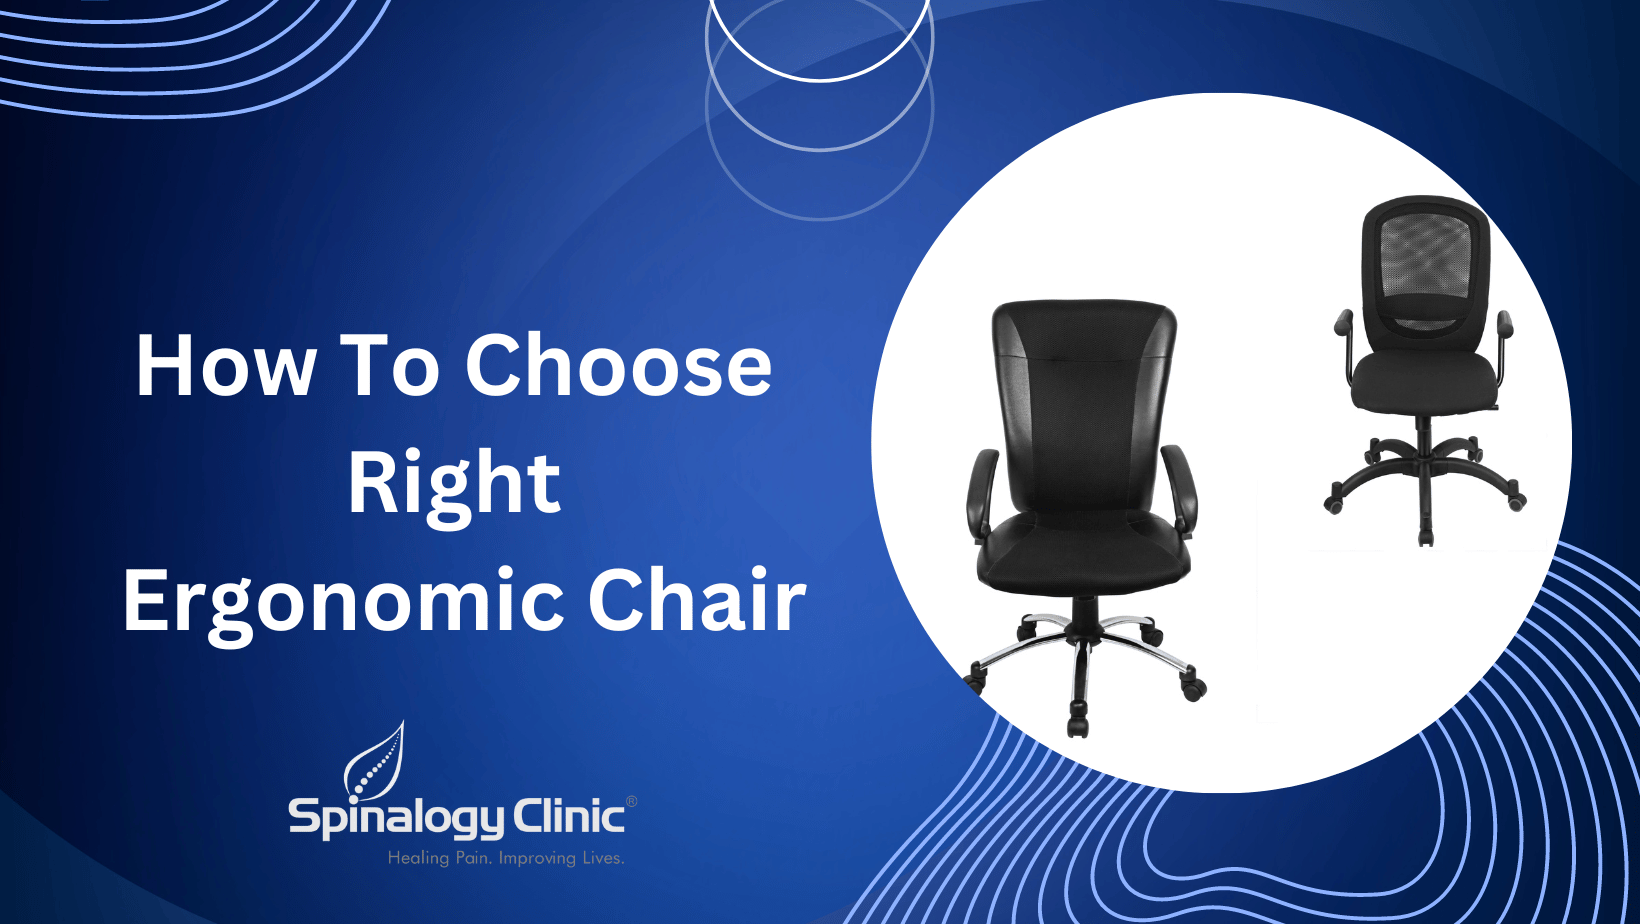 How To Choose The Right Ergonomic Chair